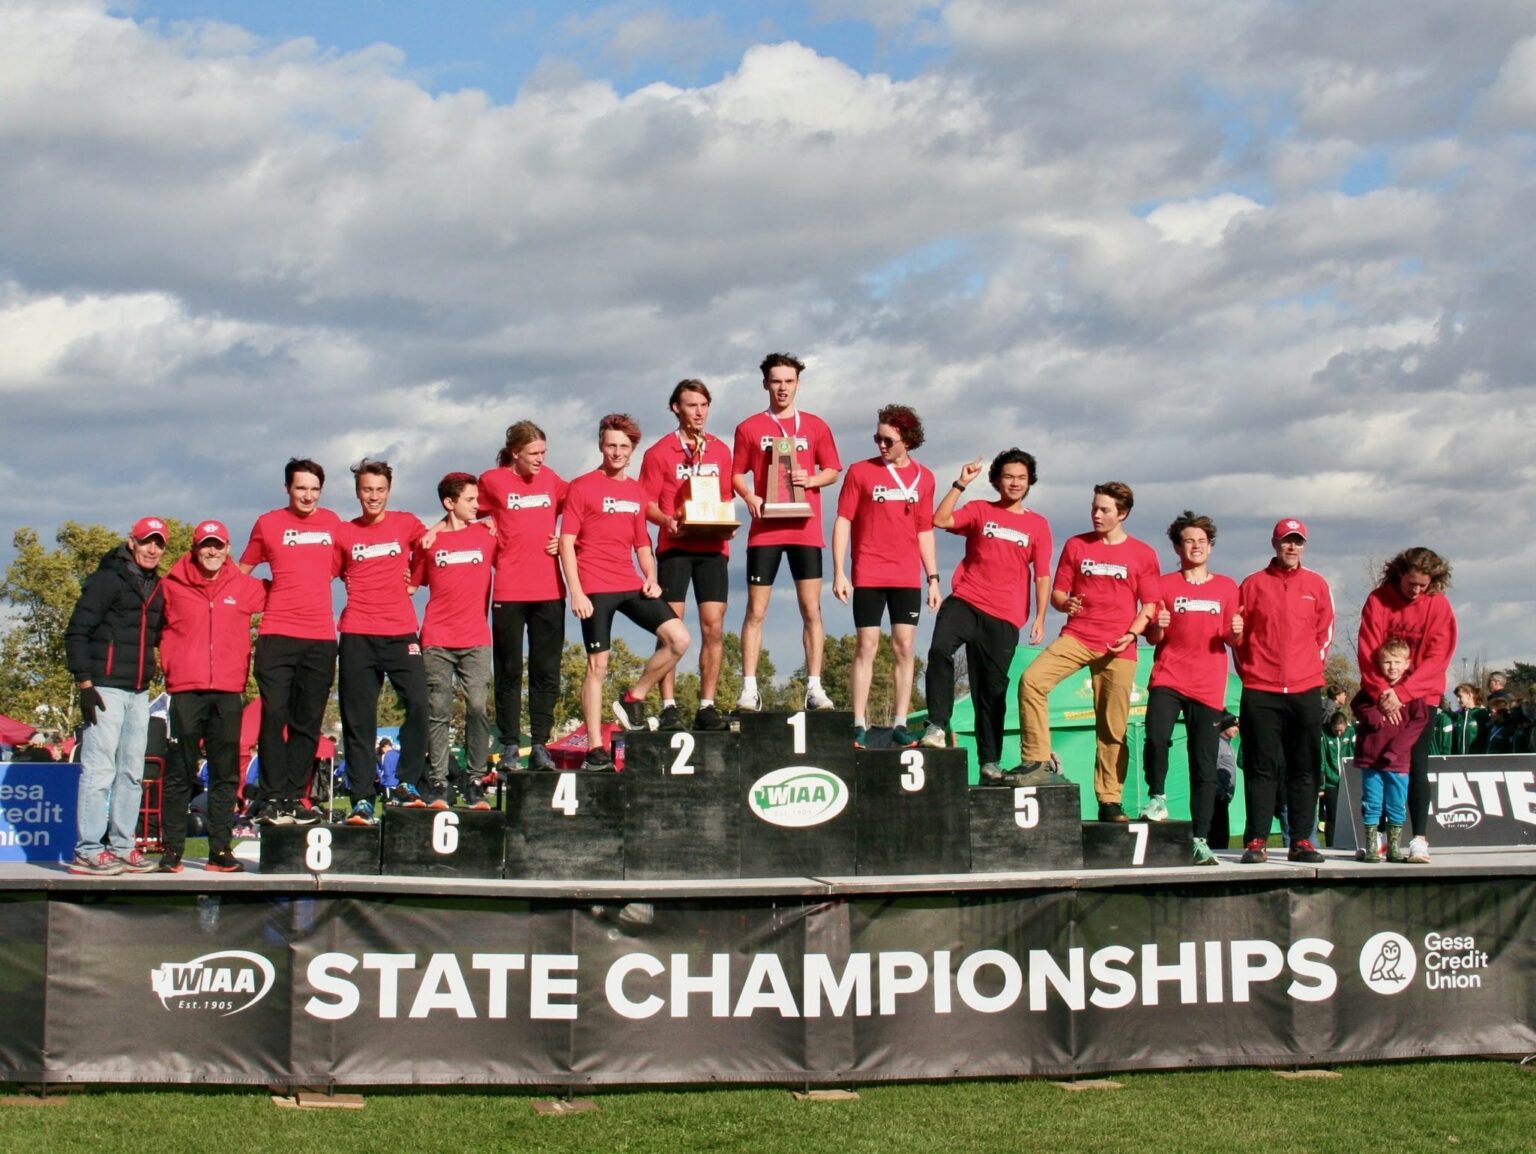 The Bellingham boys cross country team poses on the podium with their 2A state championship trophy at the WIAA 2A boys state cross country meet on Nov. 5 at Sun Willows Golf Course in Pasco